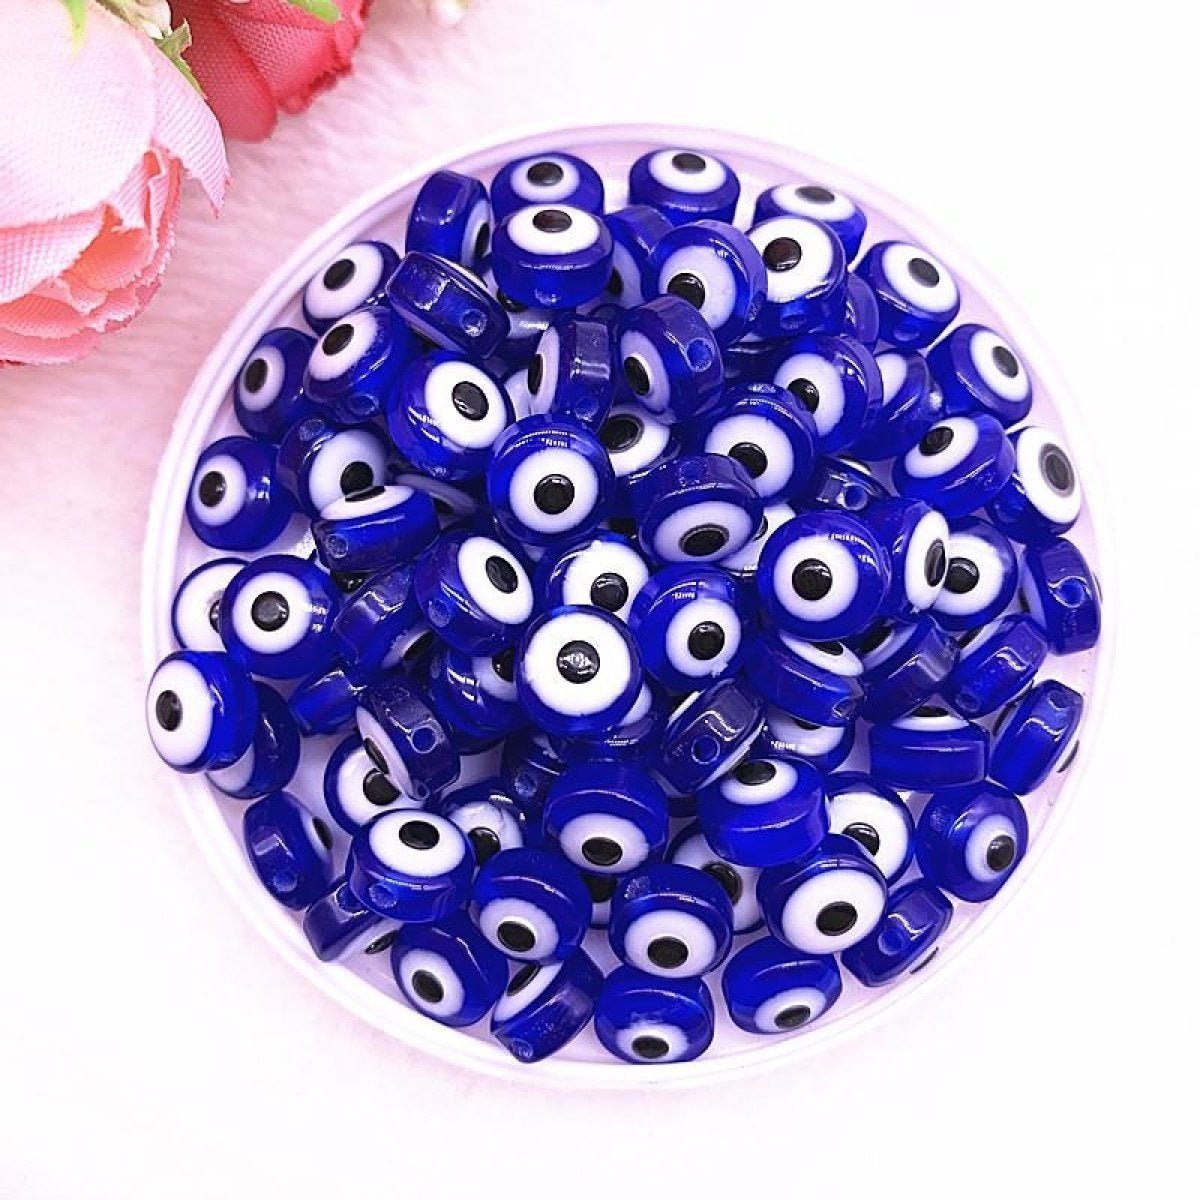 48pcs 8/10mm Oval Resin Spacer Beads Double Sided Eyes for Jewellery Making DIY Bracelet Beads Set B - Deep Blue 8mm - - Asia Sell